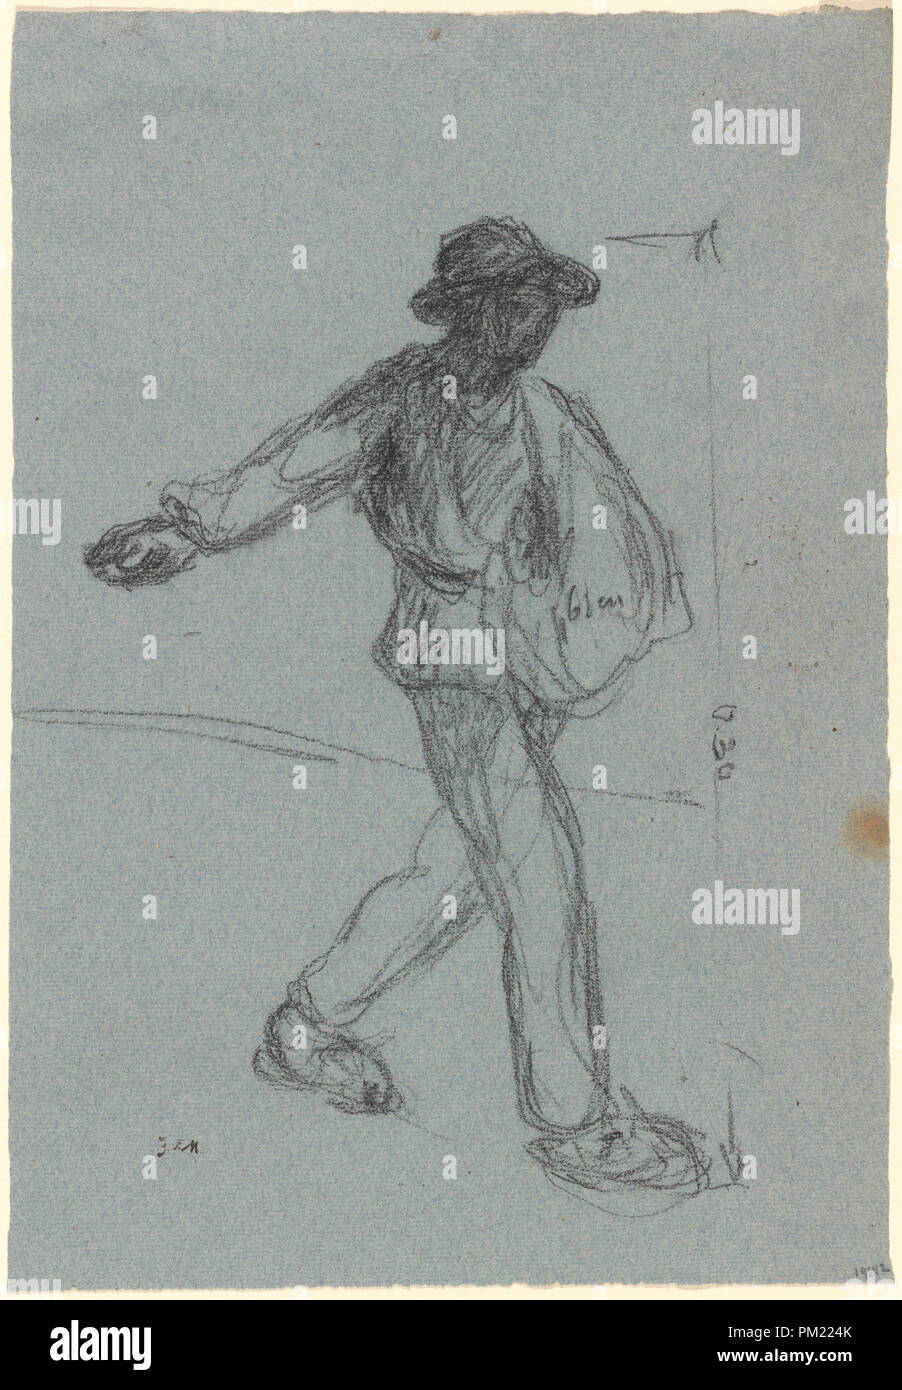 The Sower. Dimensions: overall: 37 x 25.5 cm (14 9/16 x 10 1/16 in.). Medium: chalk on blue laid paper. Museum: National Gallery of Art, Washington DC. Author: MILLET, JEAN-FRANÇOIS. Stock Photo